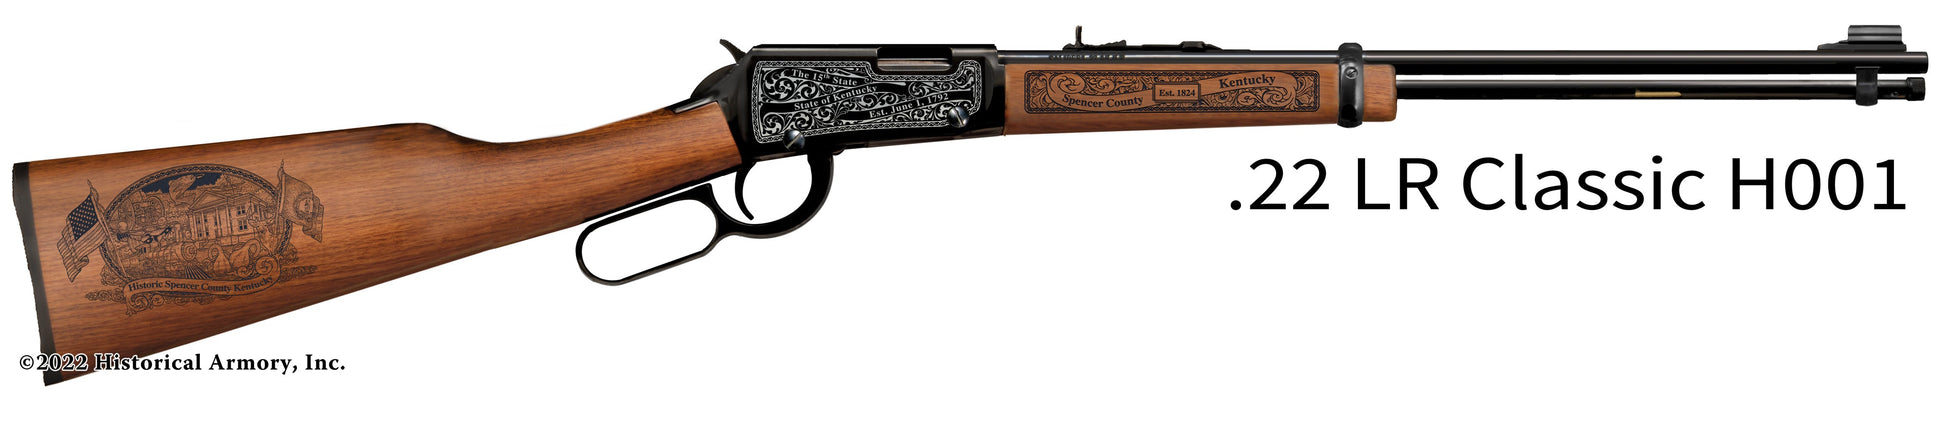 Spencer County Kentucky Engraved Henry H001 Rifle